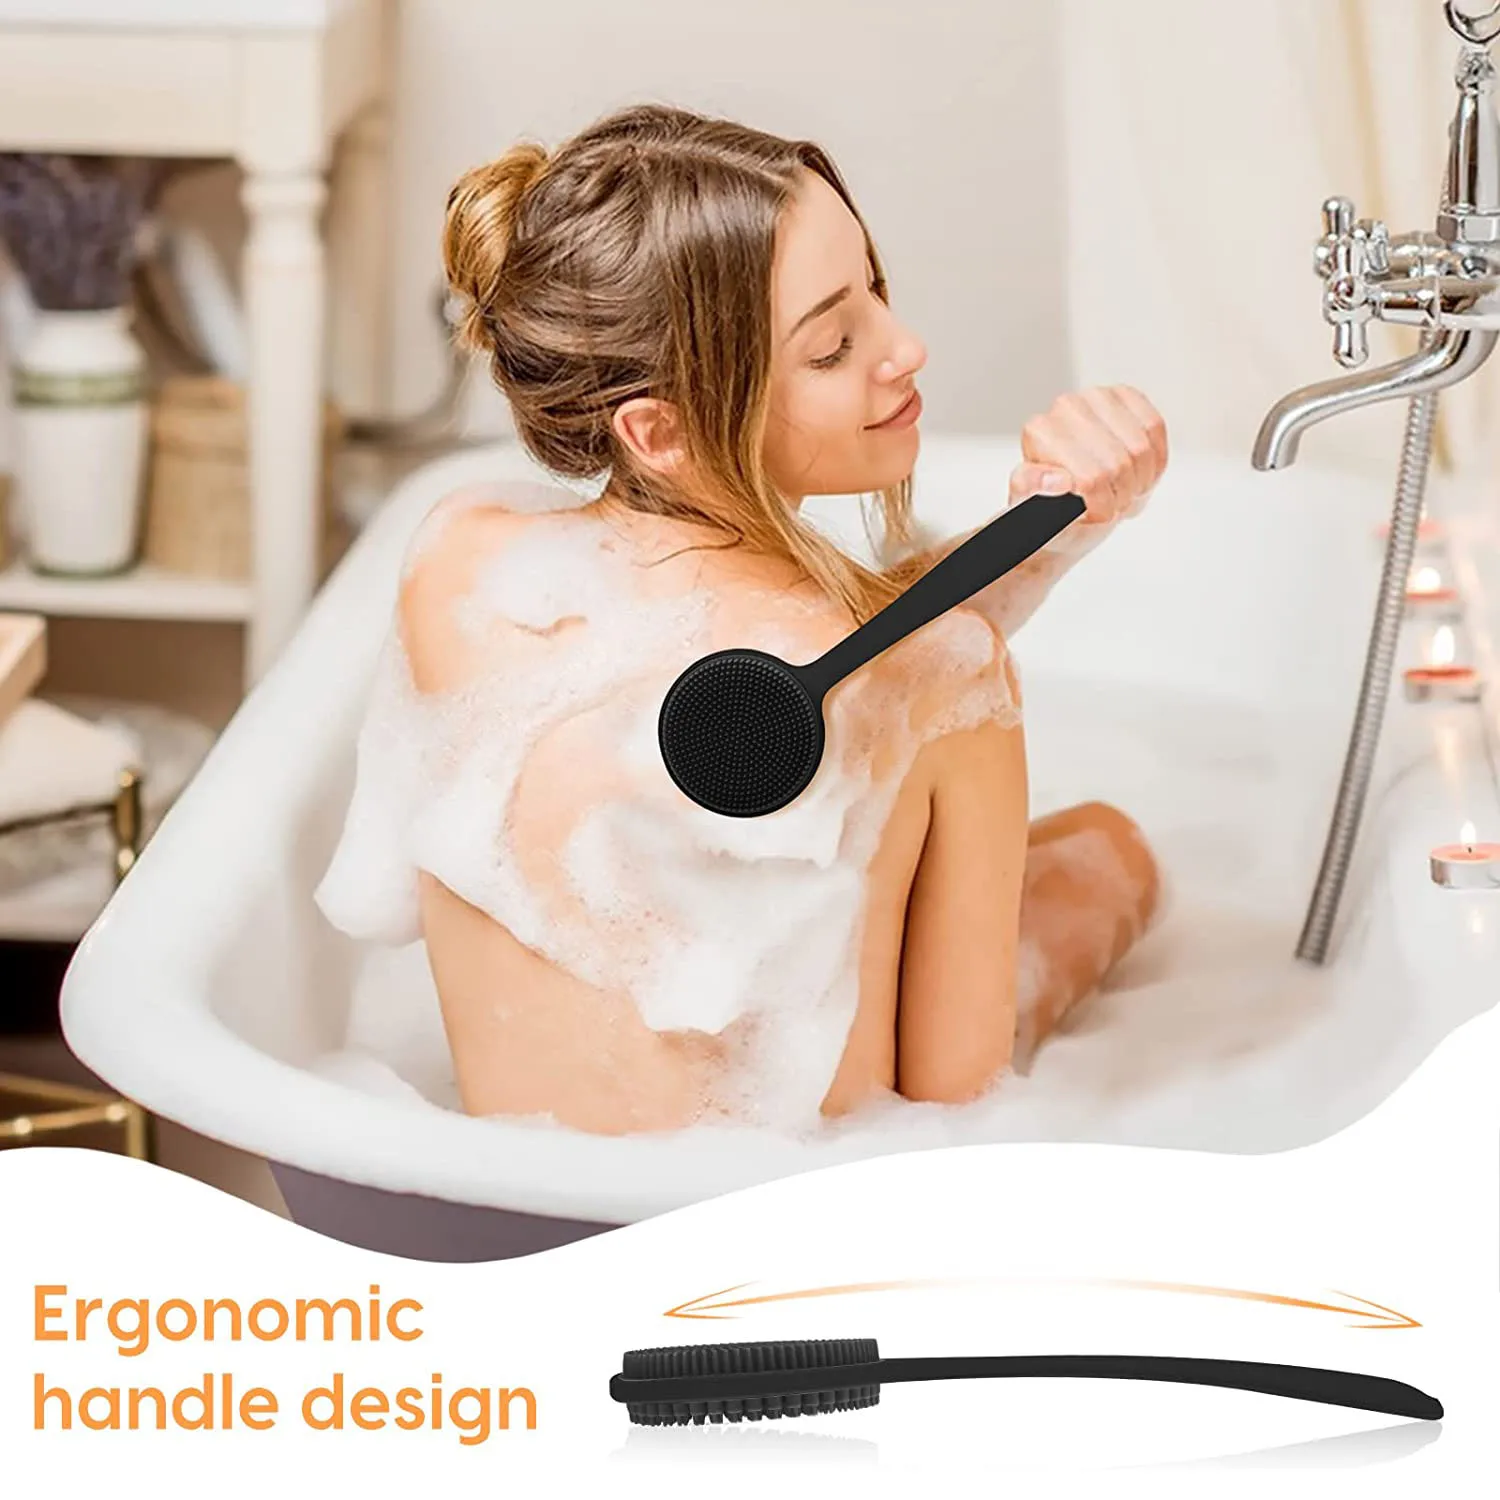 Silicone Back Scrubber for Shower, Bath Body Brush with Long Handle,Double Sided Shower Brush for Shower Exfoliating and Massage